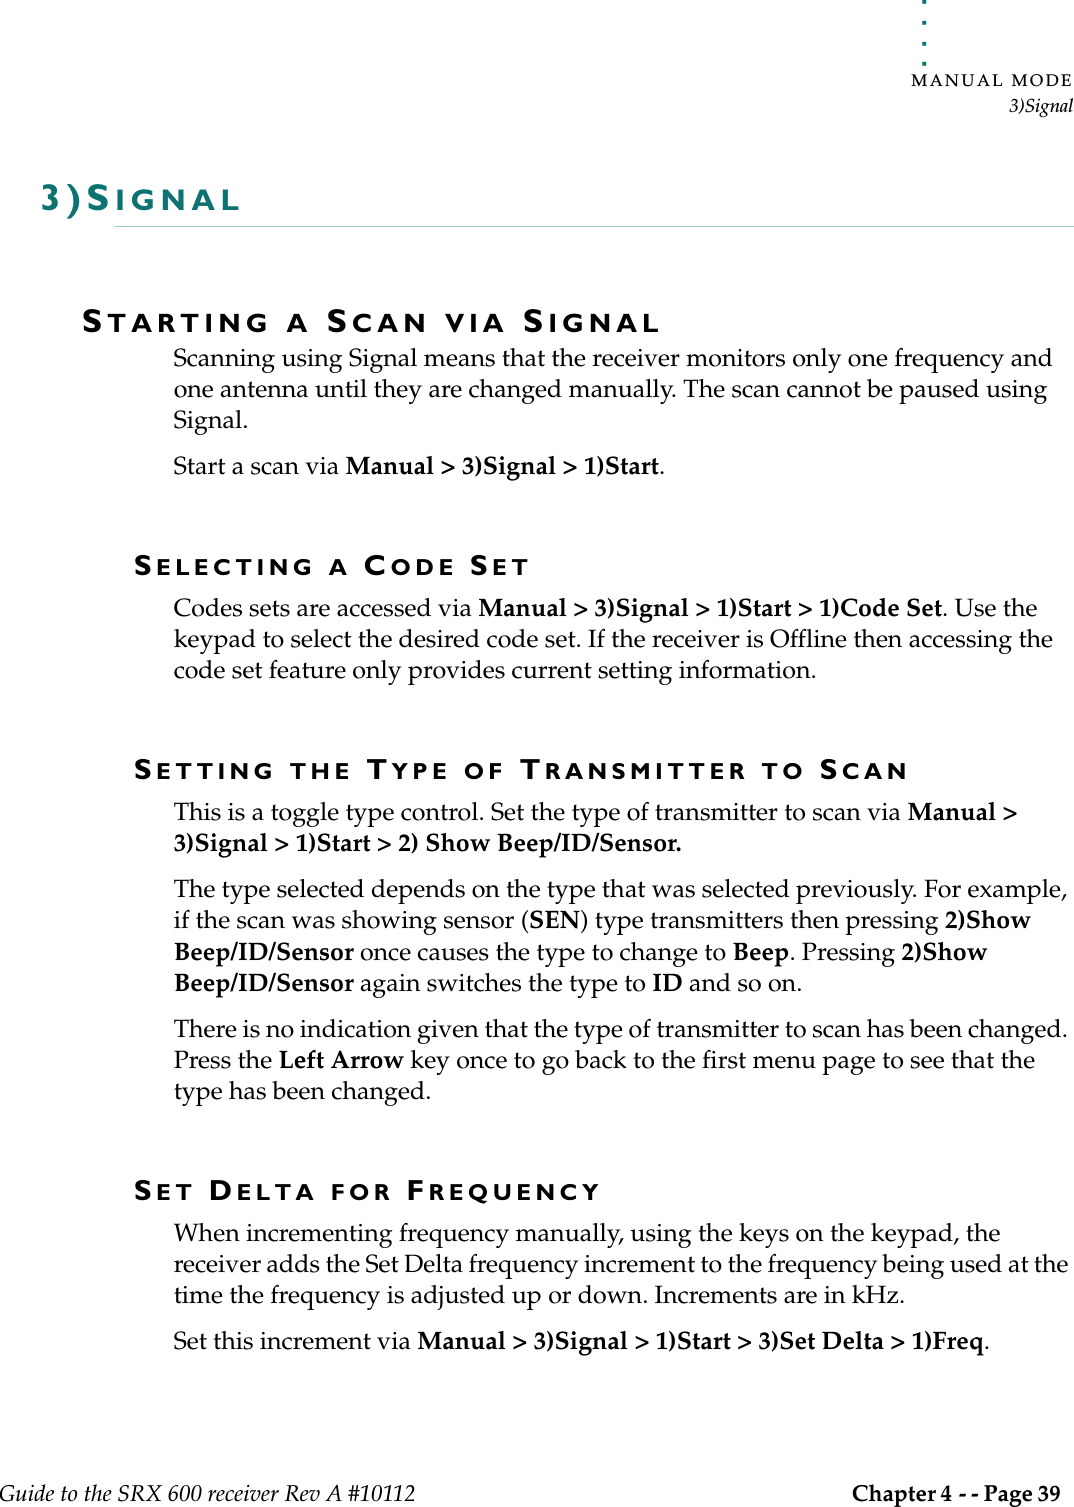 . . . . .MANUAL MODE3)SignalGuide to the SRX 600 receiver Rev A #10112 Chapter 4 - - Page 39 3)SIGNALSTARTING A SCAN VIA SIGNALScanning using Signal means that the receiver monitors only one frequency and one antenna until they are changed manually. The scan cannot be paused using Signal. Start a scan via Manual &gt; 3)Signal &gt; 1)Start.SELECTING A CODE SETCodes sets are accessed via Manual &gt; 3)Signal &gt; 1)Start &gt; 1)Code Set. Use the keypad to select the desired code set. If the receiver is Offline then accessing the code set feature only provides current setting information. SETTING THE TYPE OF TRANSMITTER TO SCANThis is a toggle type control. Set the type of transmitter to scan via Manual &gt; 3)Signal &gt; 1)Start &gt; 2) Show Beep/ID/Sensor.The type selected depends on the type that was selected previously. For example, if the scan was showing sensor (SEN) type transmitters then pressing 2)Show Beep/ID/Sensor once causes the type to change to Beep. Pressing 2)Show Beep/ID/Sensor again switches the type to ID and so on.There is no indication given that the type of transmitter to scan has been changed. Press the Left Arrow key once to go back to the first menu page to see that the type has been changed.SET DELTA FOR FREQUENCYWhen incrementing frequency manually, using the keys on the keypad, the receiver adds the Set Delta frequency increment to the frequency being used at the time the frequency is adjusted up or down. Increments are in kHz.Set this increment via Manual &gt; 3)Signal &gt; 1)Start &gt; 3)Set Delta &gt; 1)Freq.